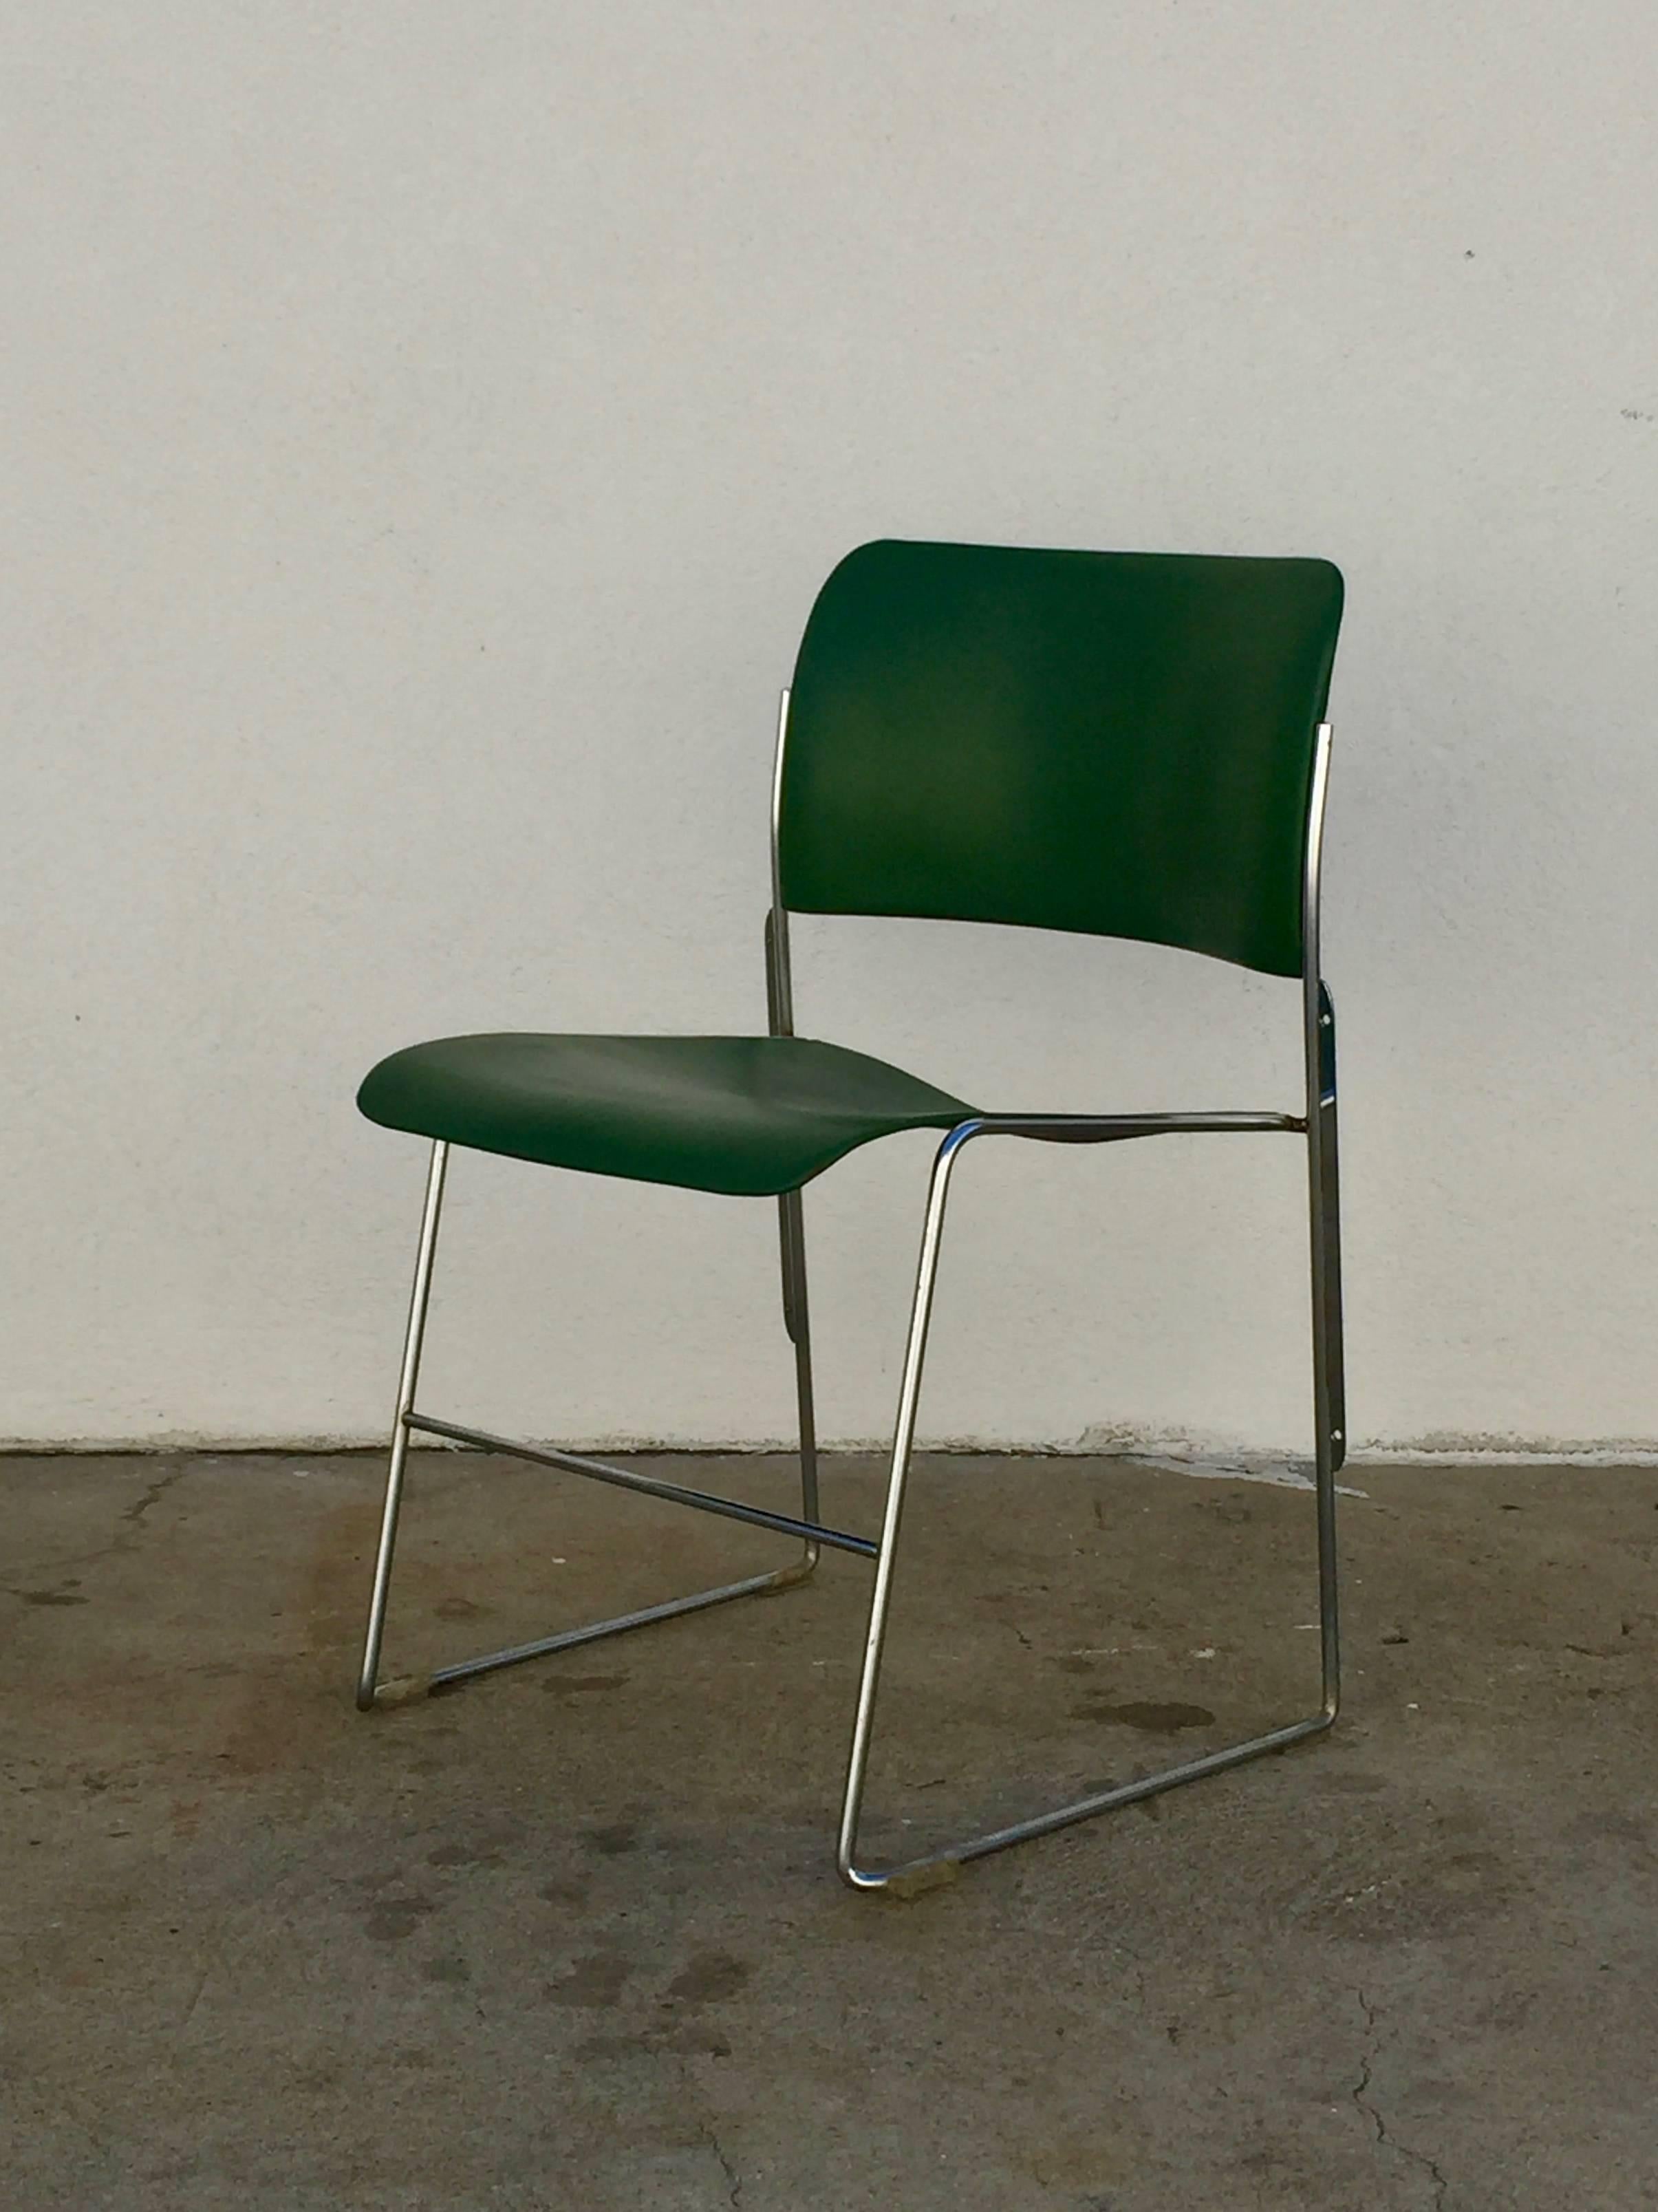 Set of 40/4 green chairs by David Rowland.